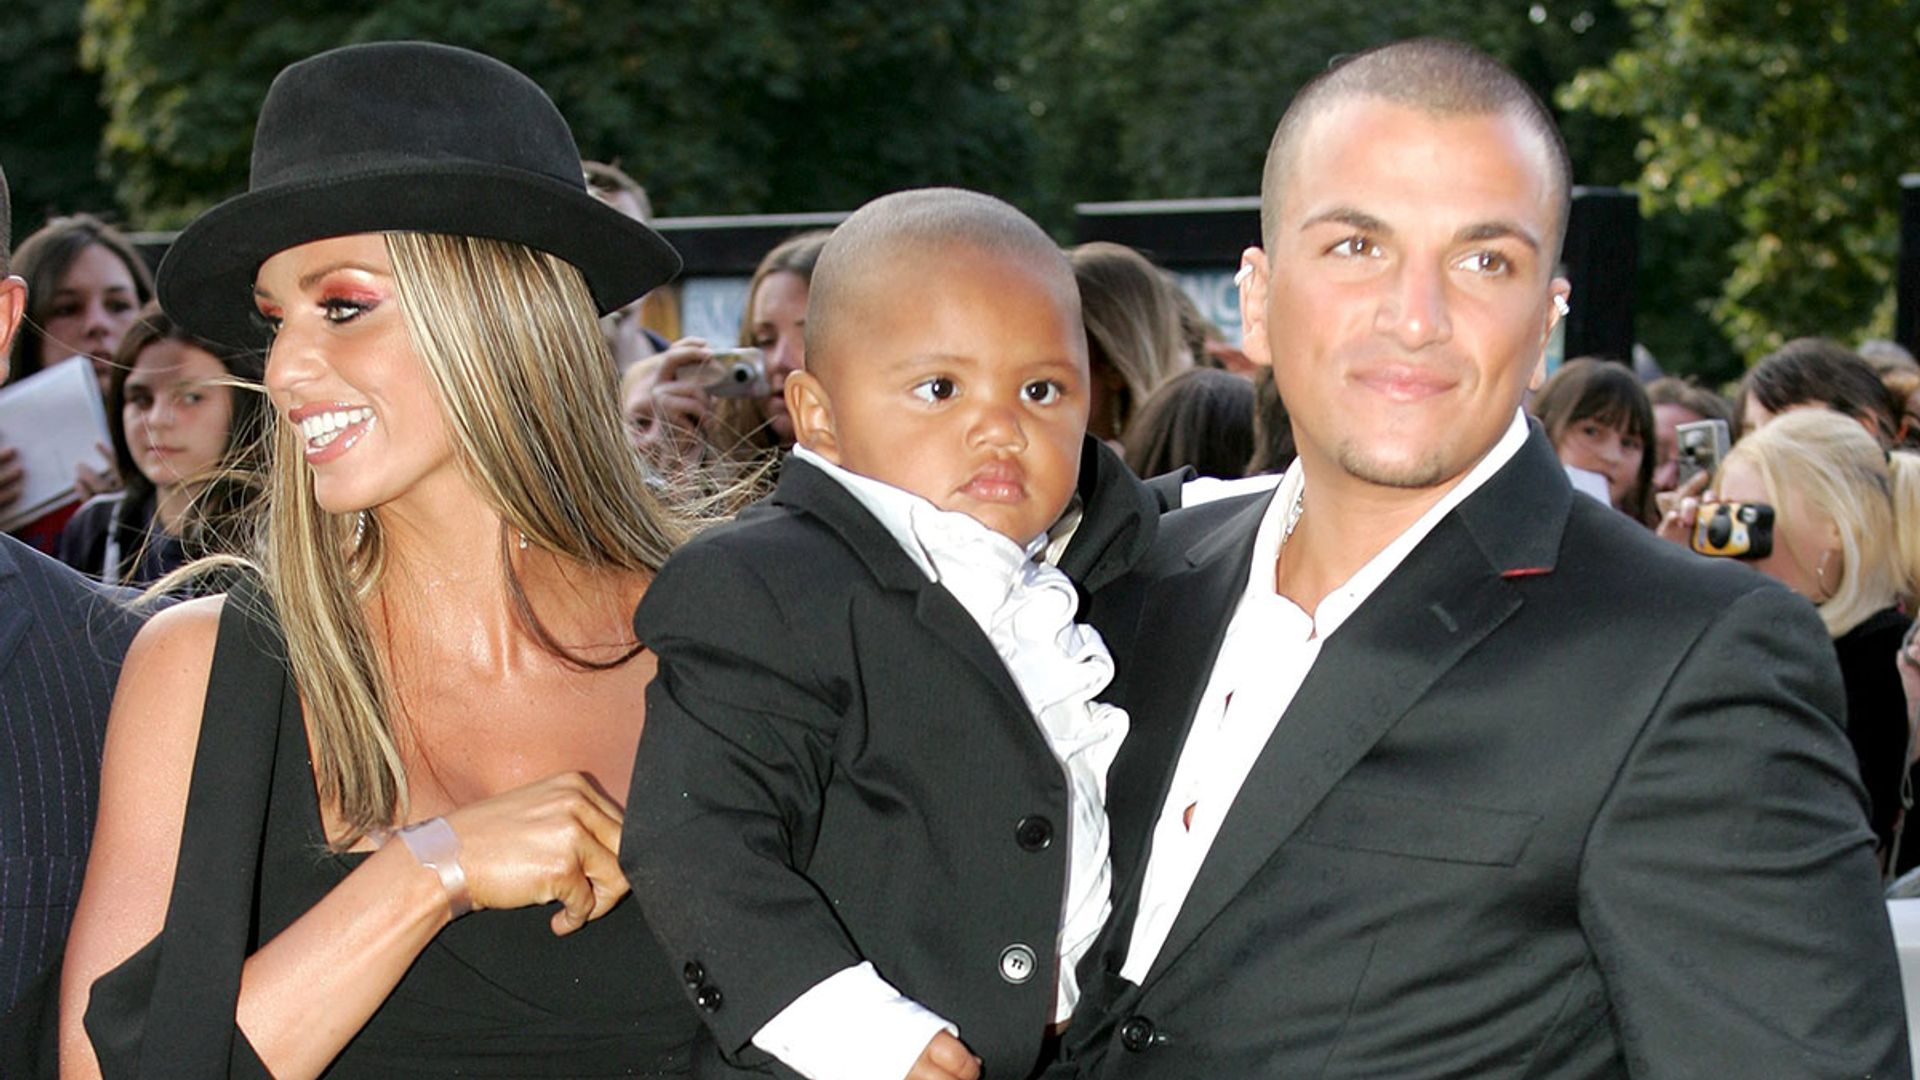 Peter Andre shares sweet birthday message for Katie Price's son Harvey